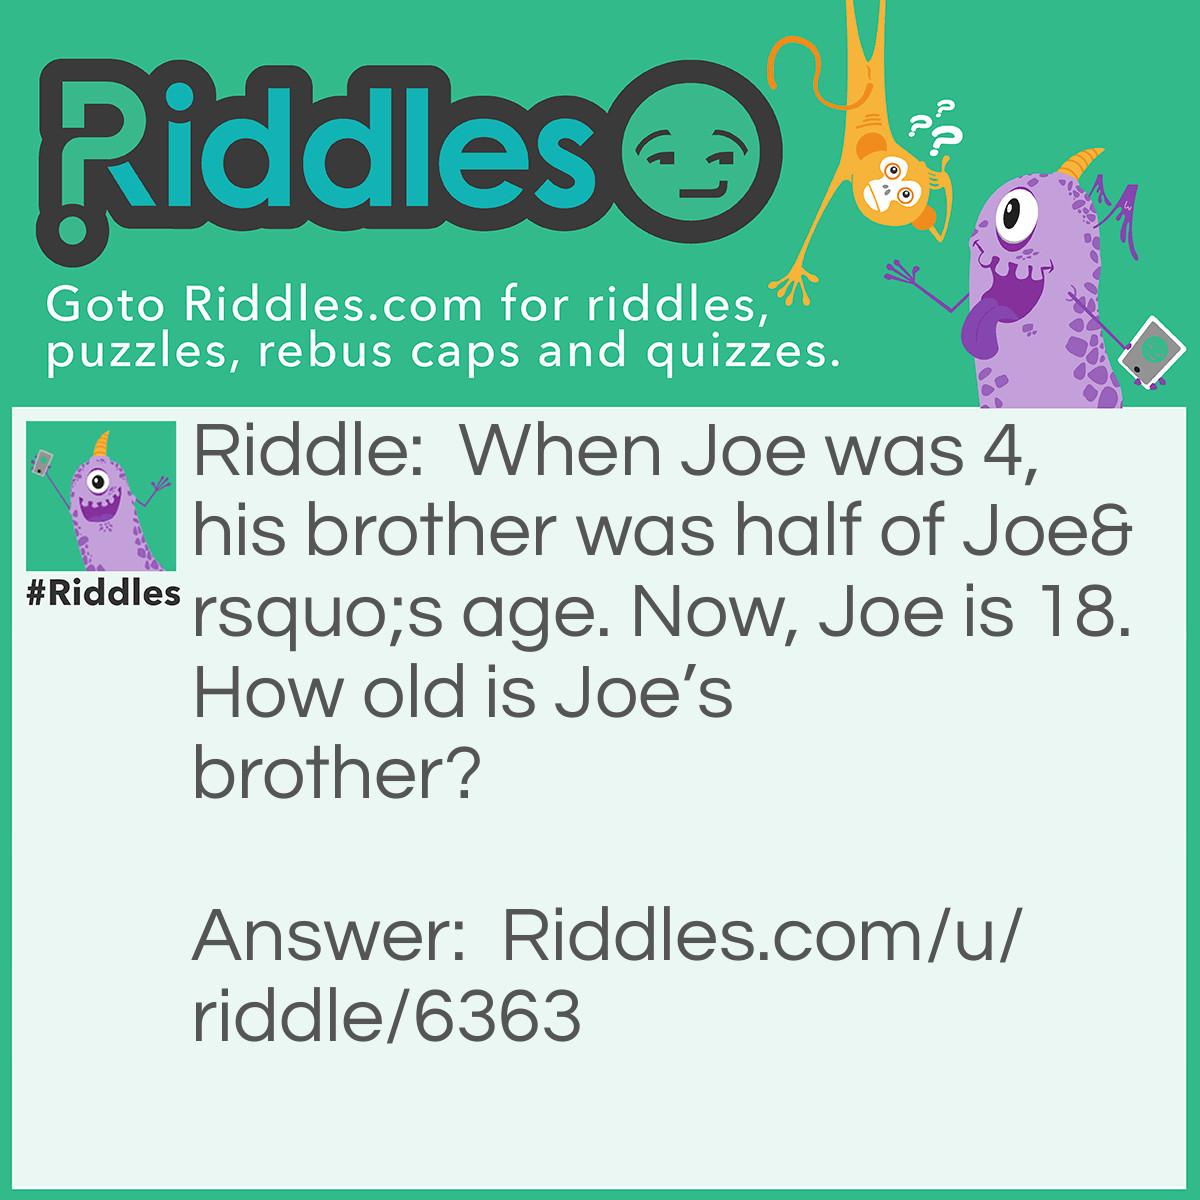 Riddle: When Joe was 4, his brother was half of Joe's age. Now, Joe is 18. How old is Joe's brother? Answer: Joe’s brother is 9. When Joe was 4, his brother was 2. There you have it!